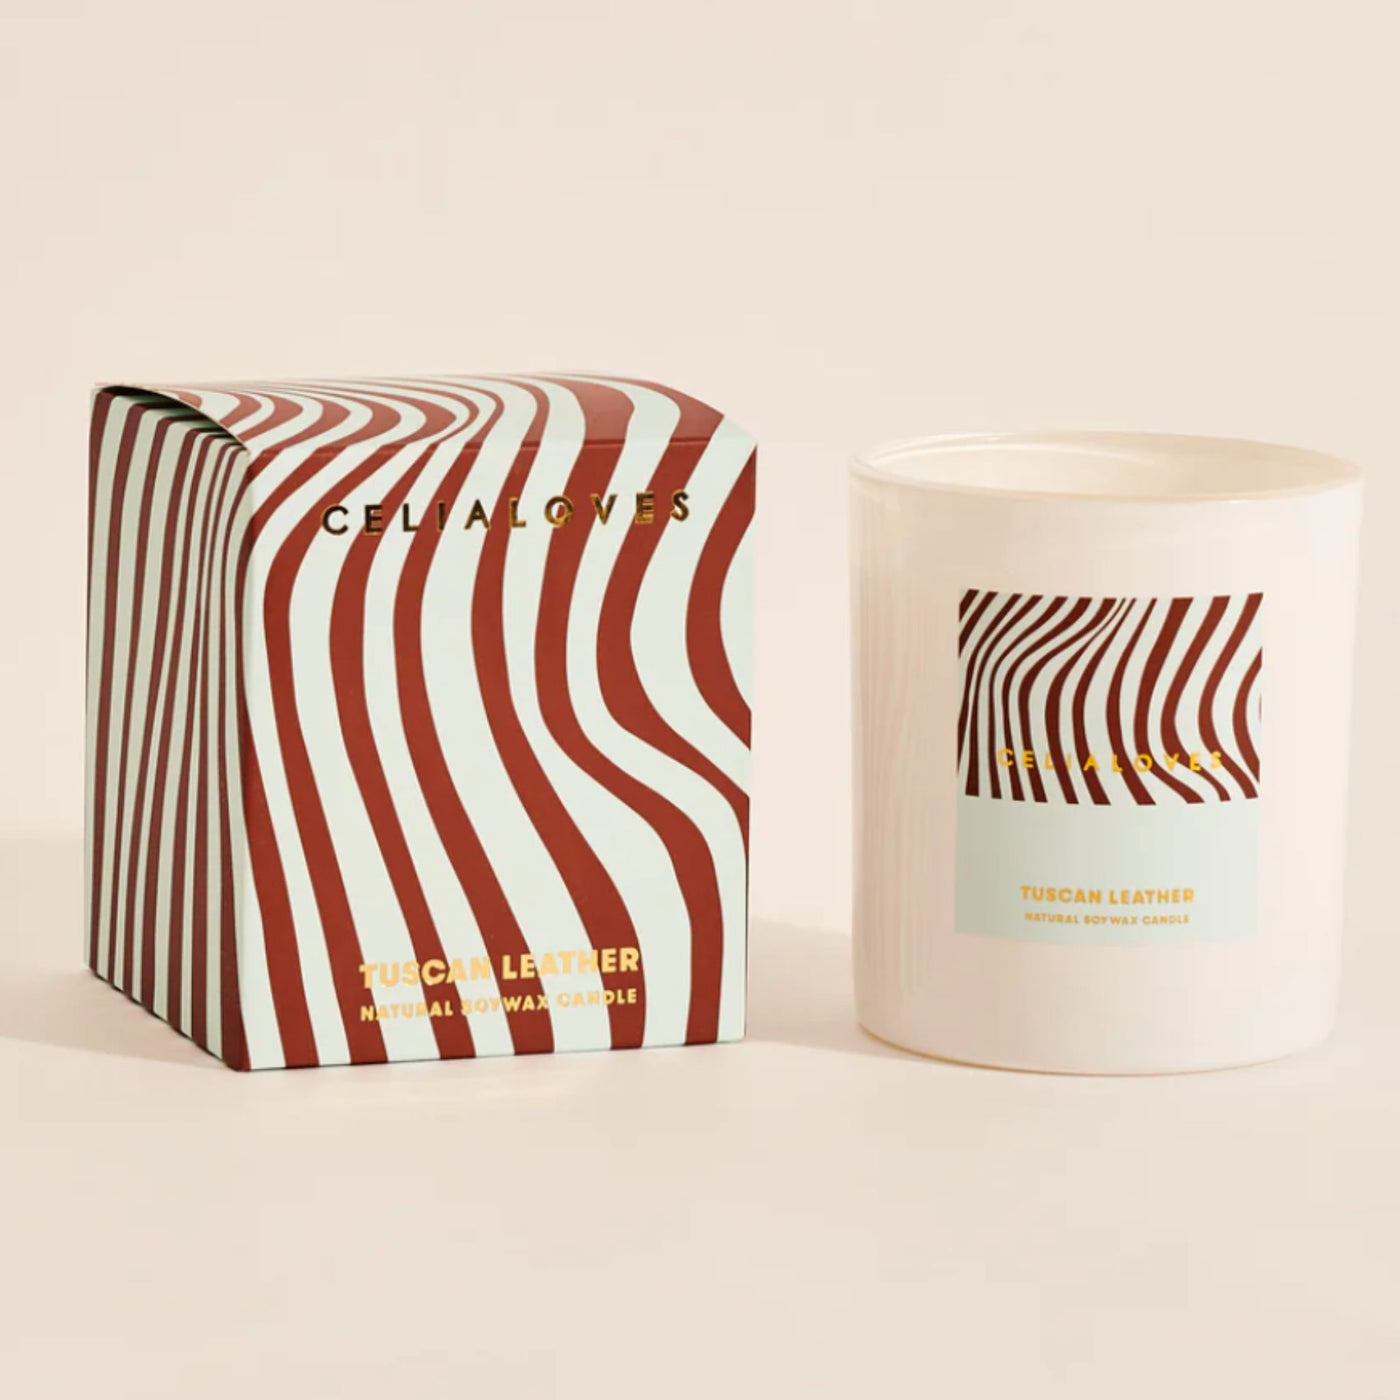 Celia Loves Scented Candle Tuscan Leather